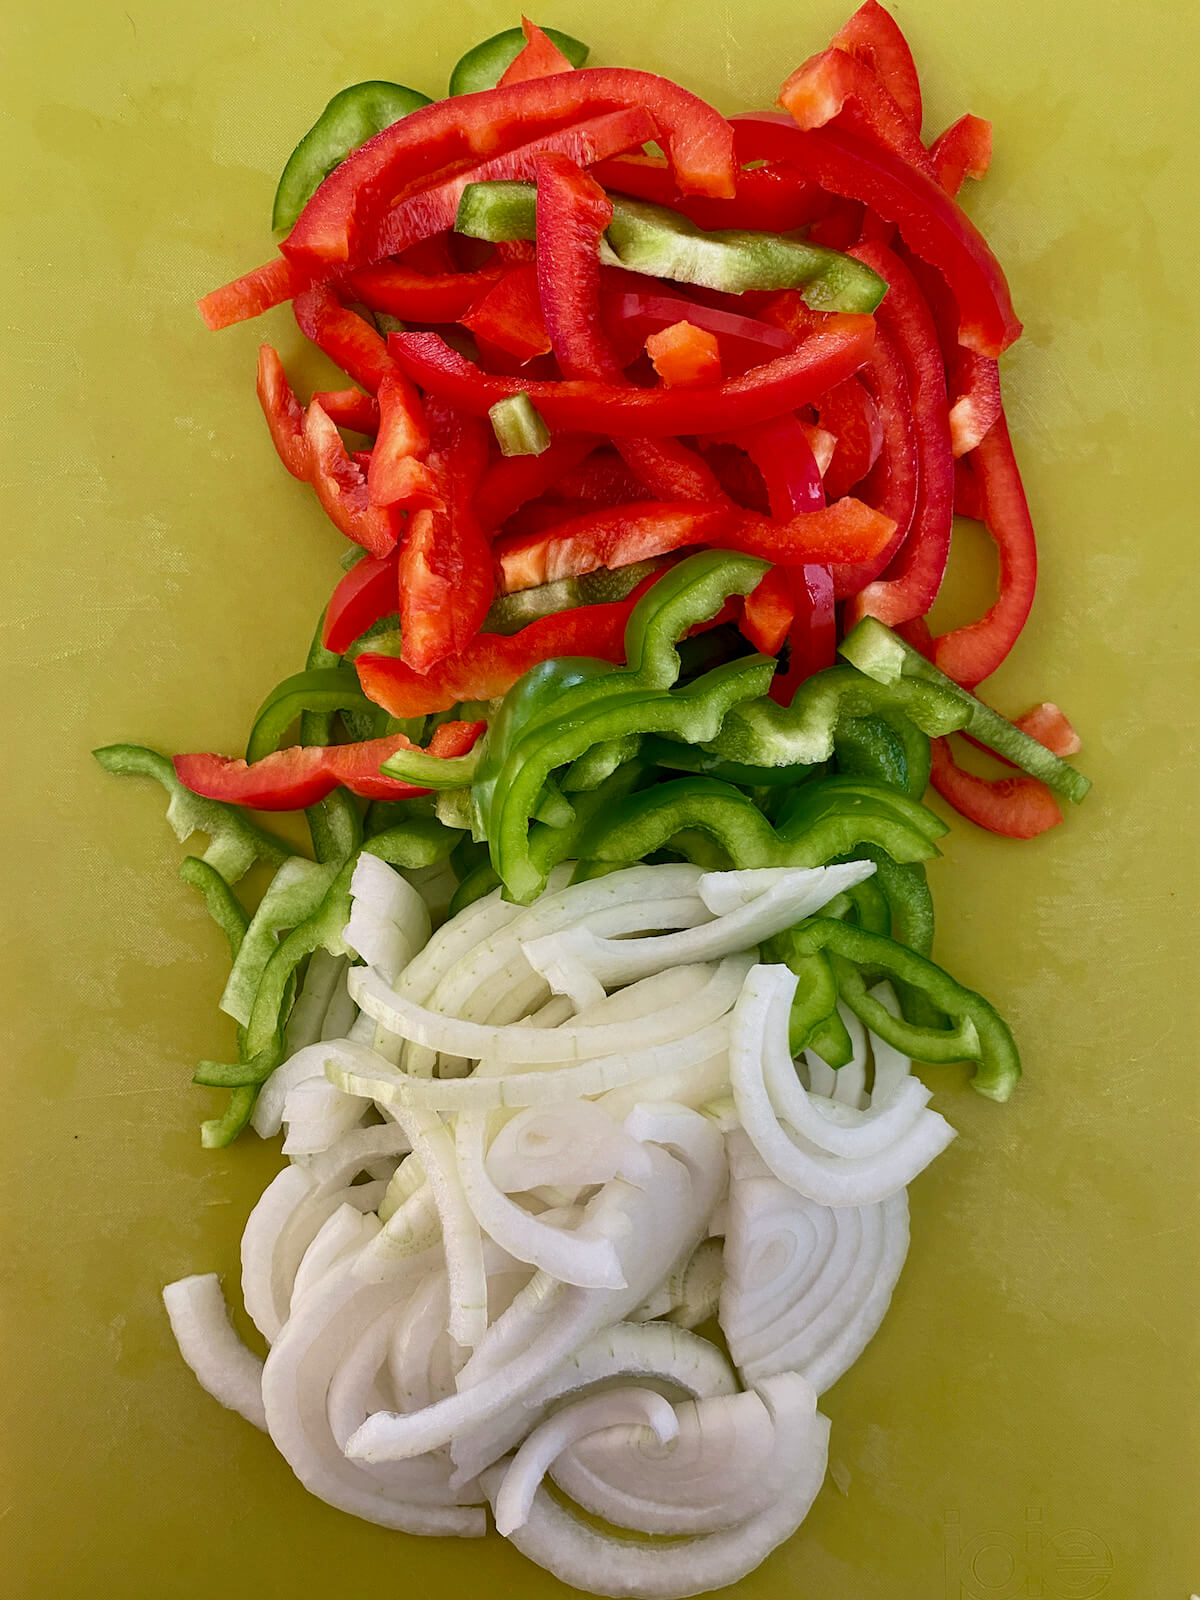 Sliced onion, red bell pepper, and green bell pepper on a green cutting board.